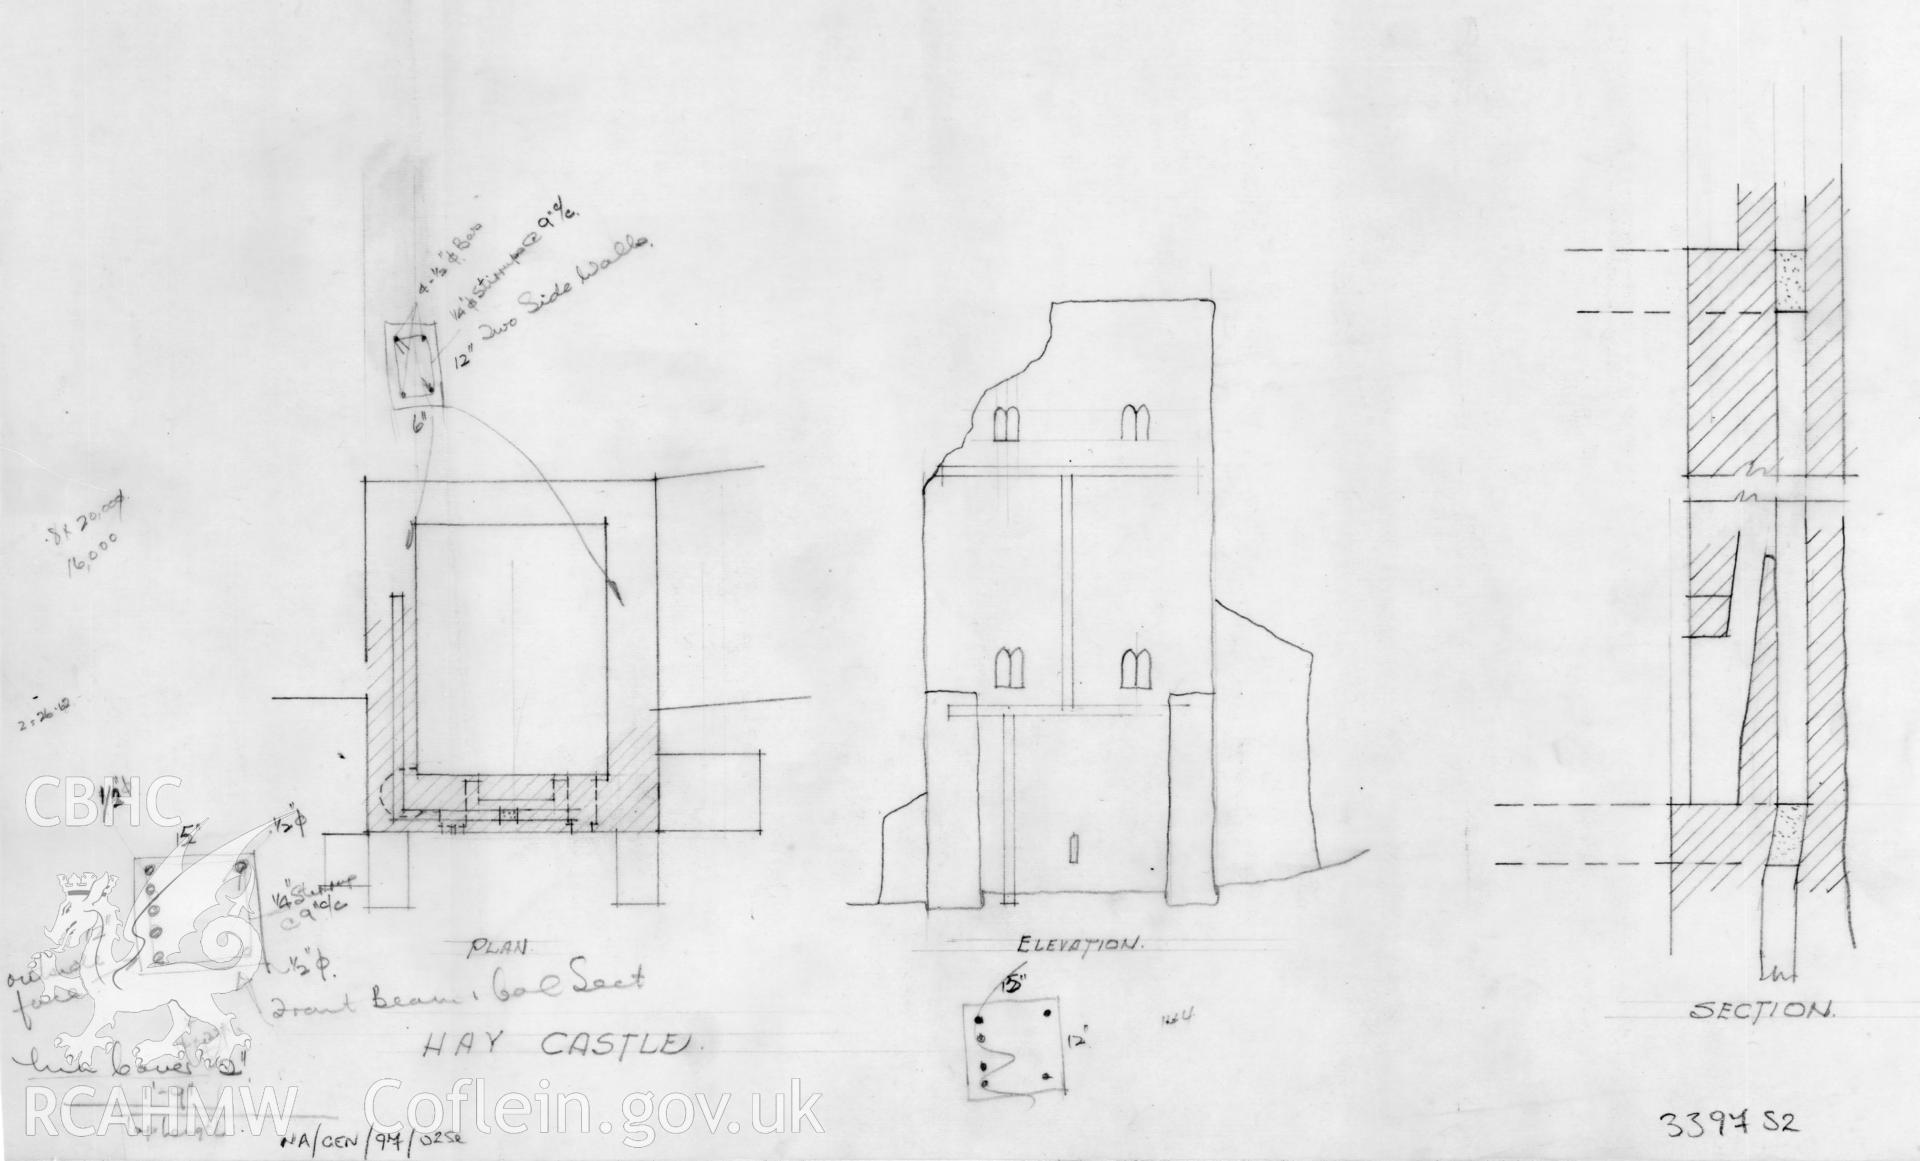 Sketch elevation, section and plan of Hay Castle, showing the reinforcement of the outer wall, pencil on tracing paper.